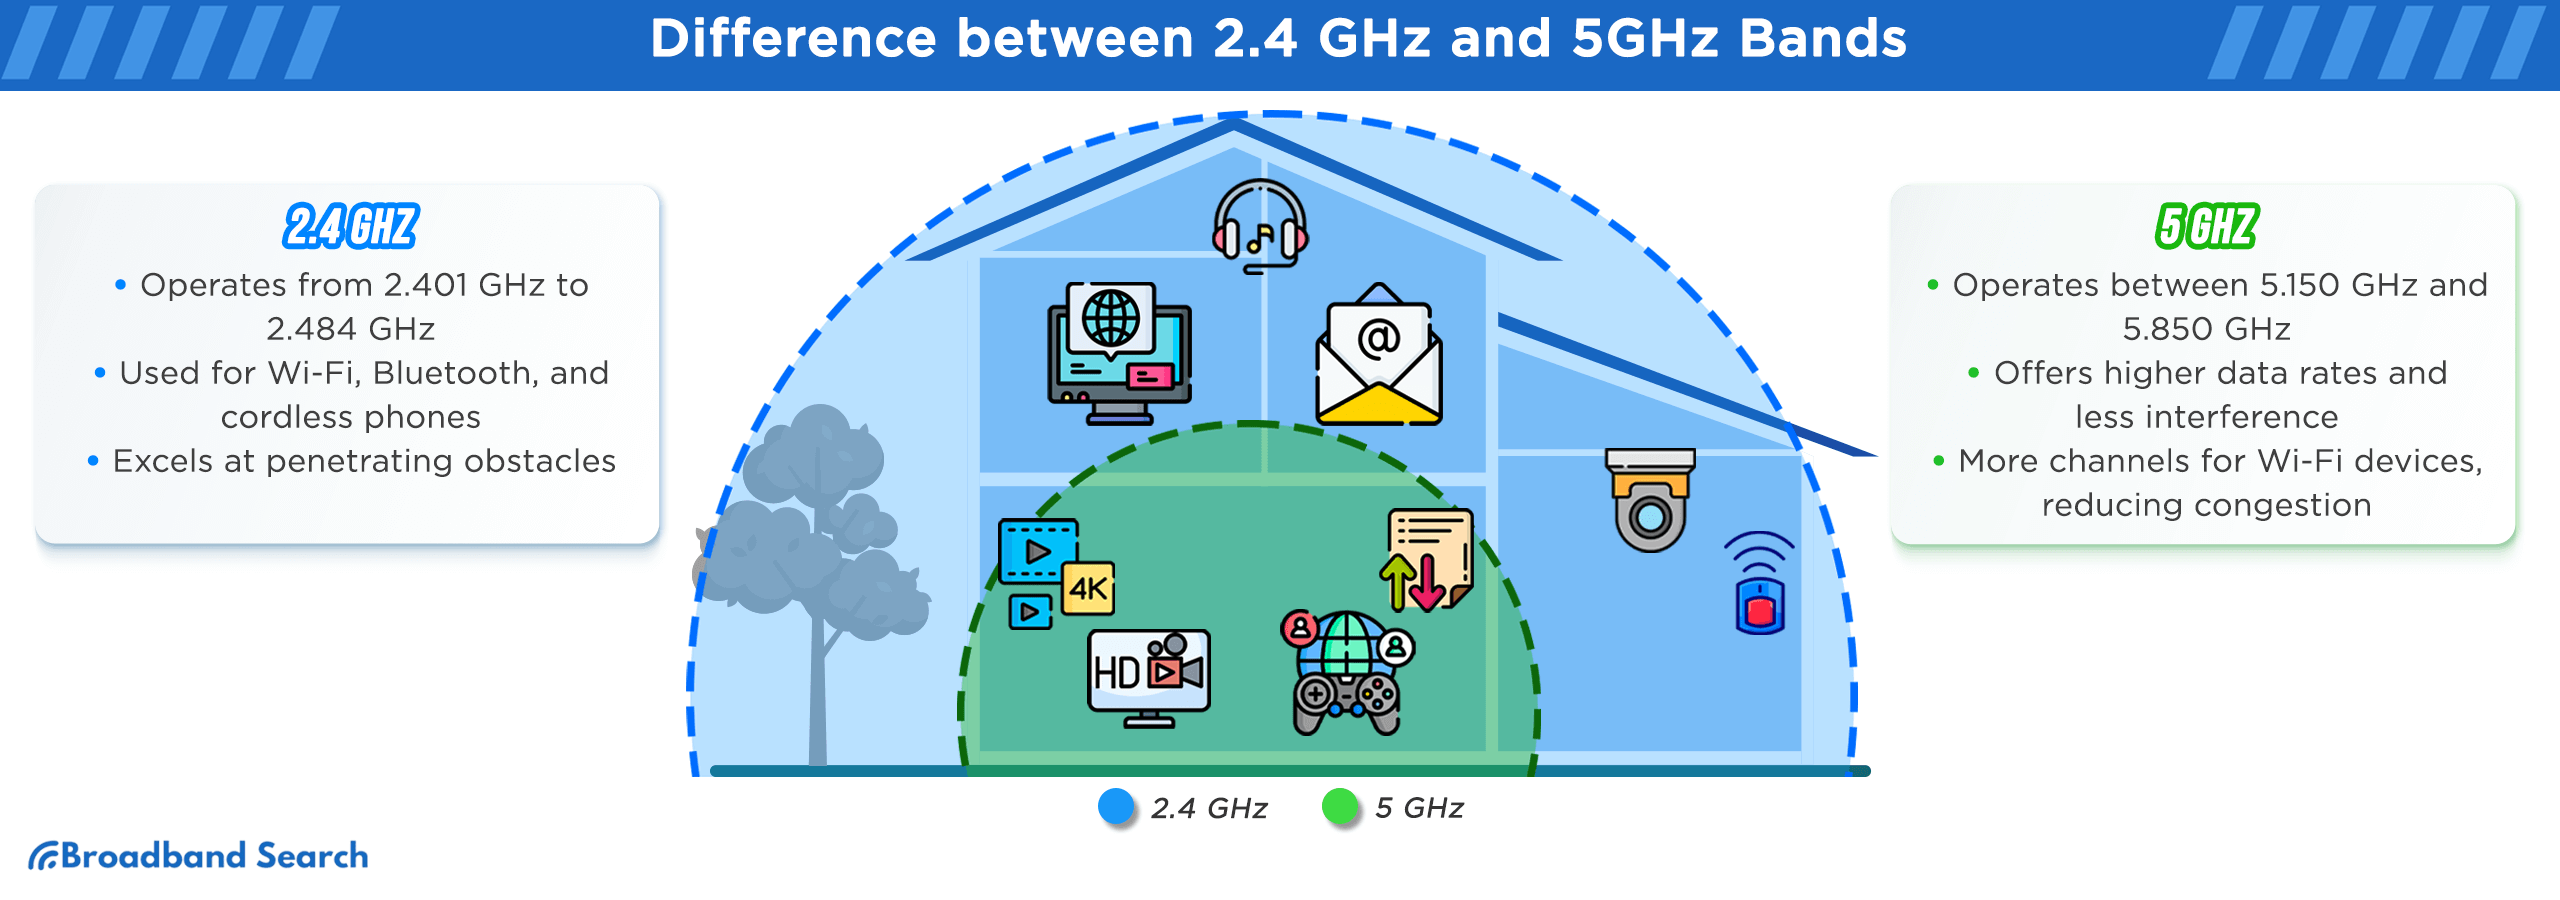 difference between 2.4 ghz and 5ghz bands